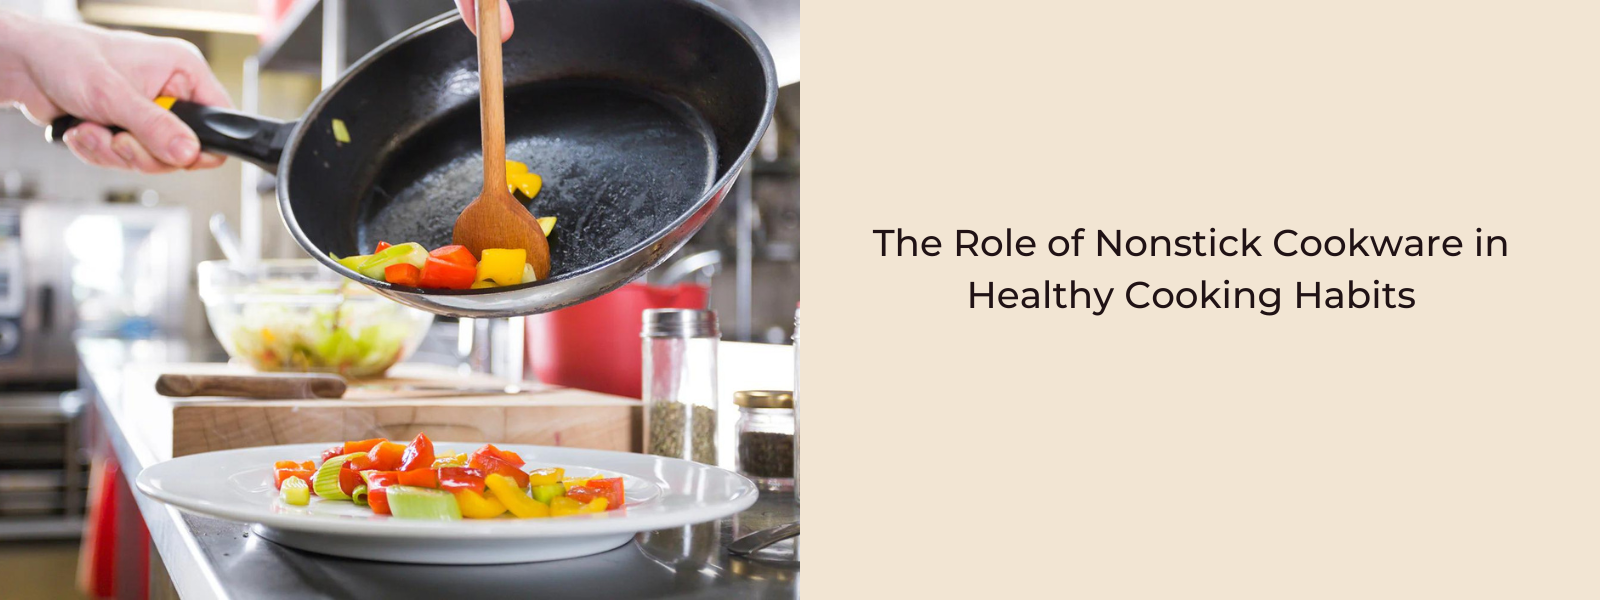 The Role of Nonstick Cookware in Healthy Cooking Habits - PotsandPans India